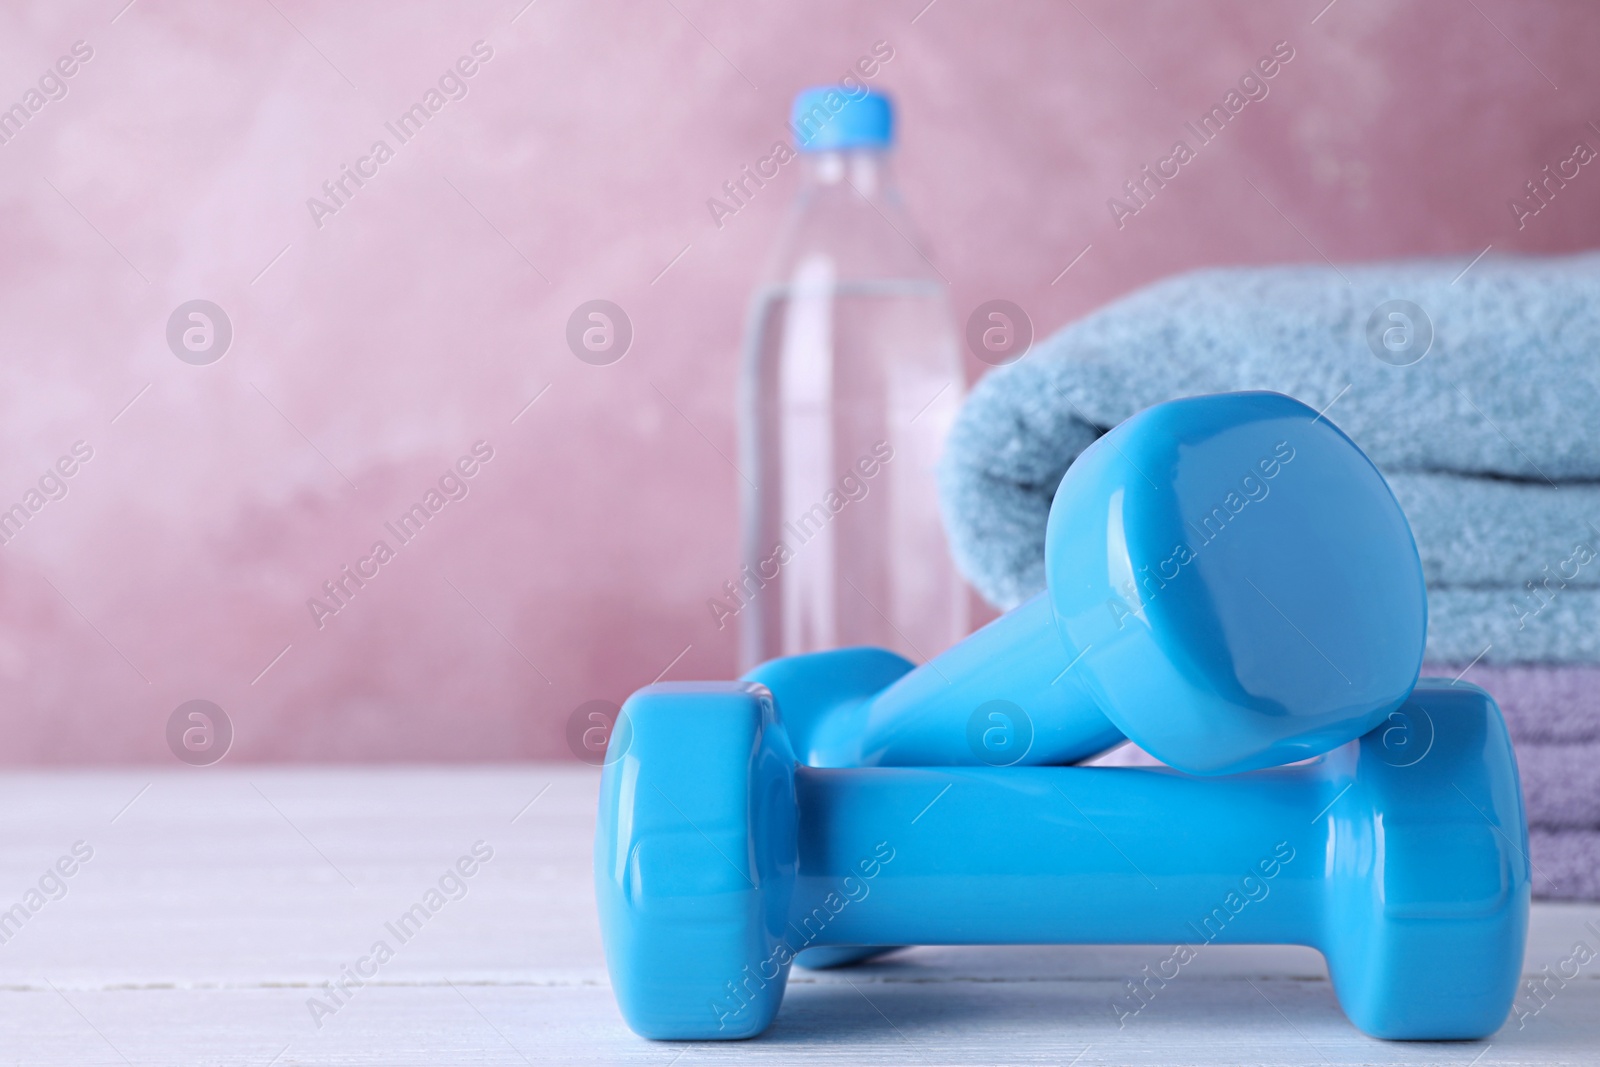 Photo of Stylish dumbbells, towels and bottle of water on table against color background, space for text. Home fitness